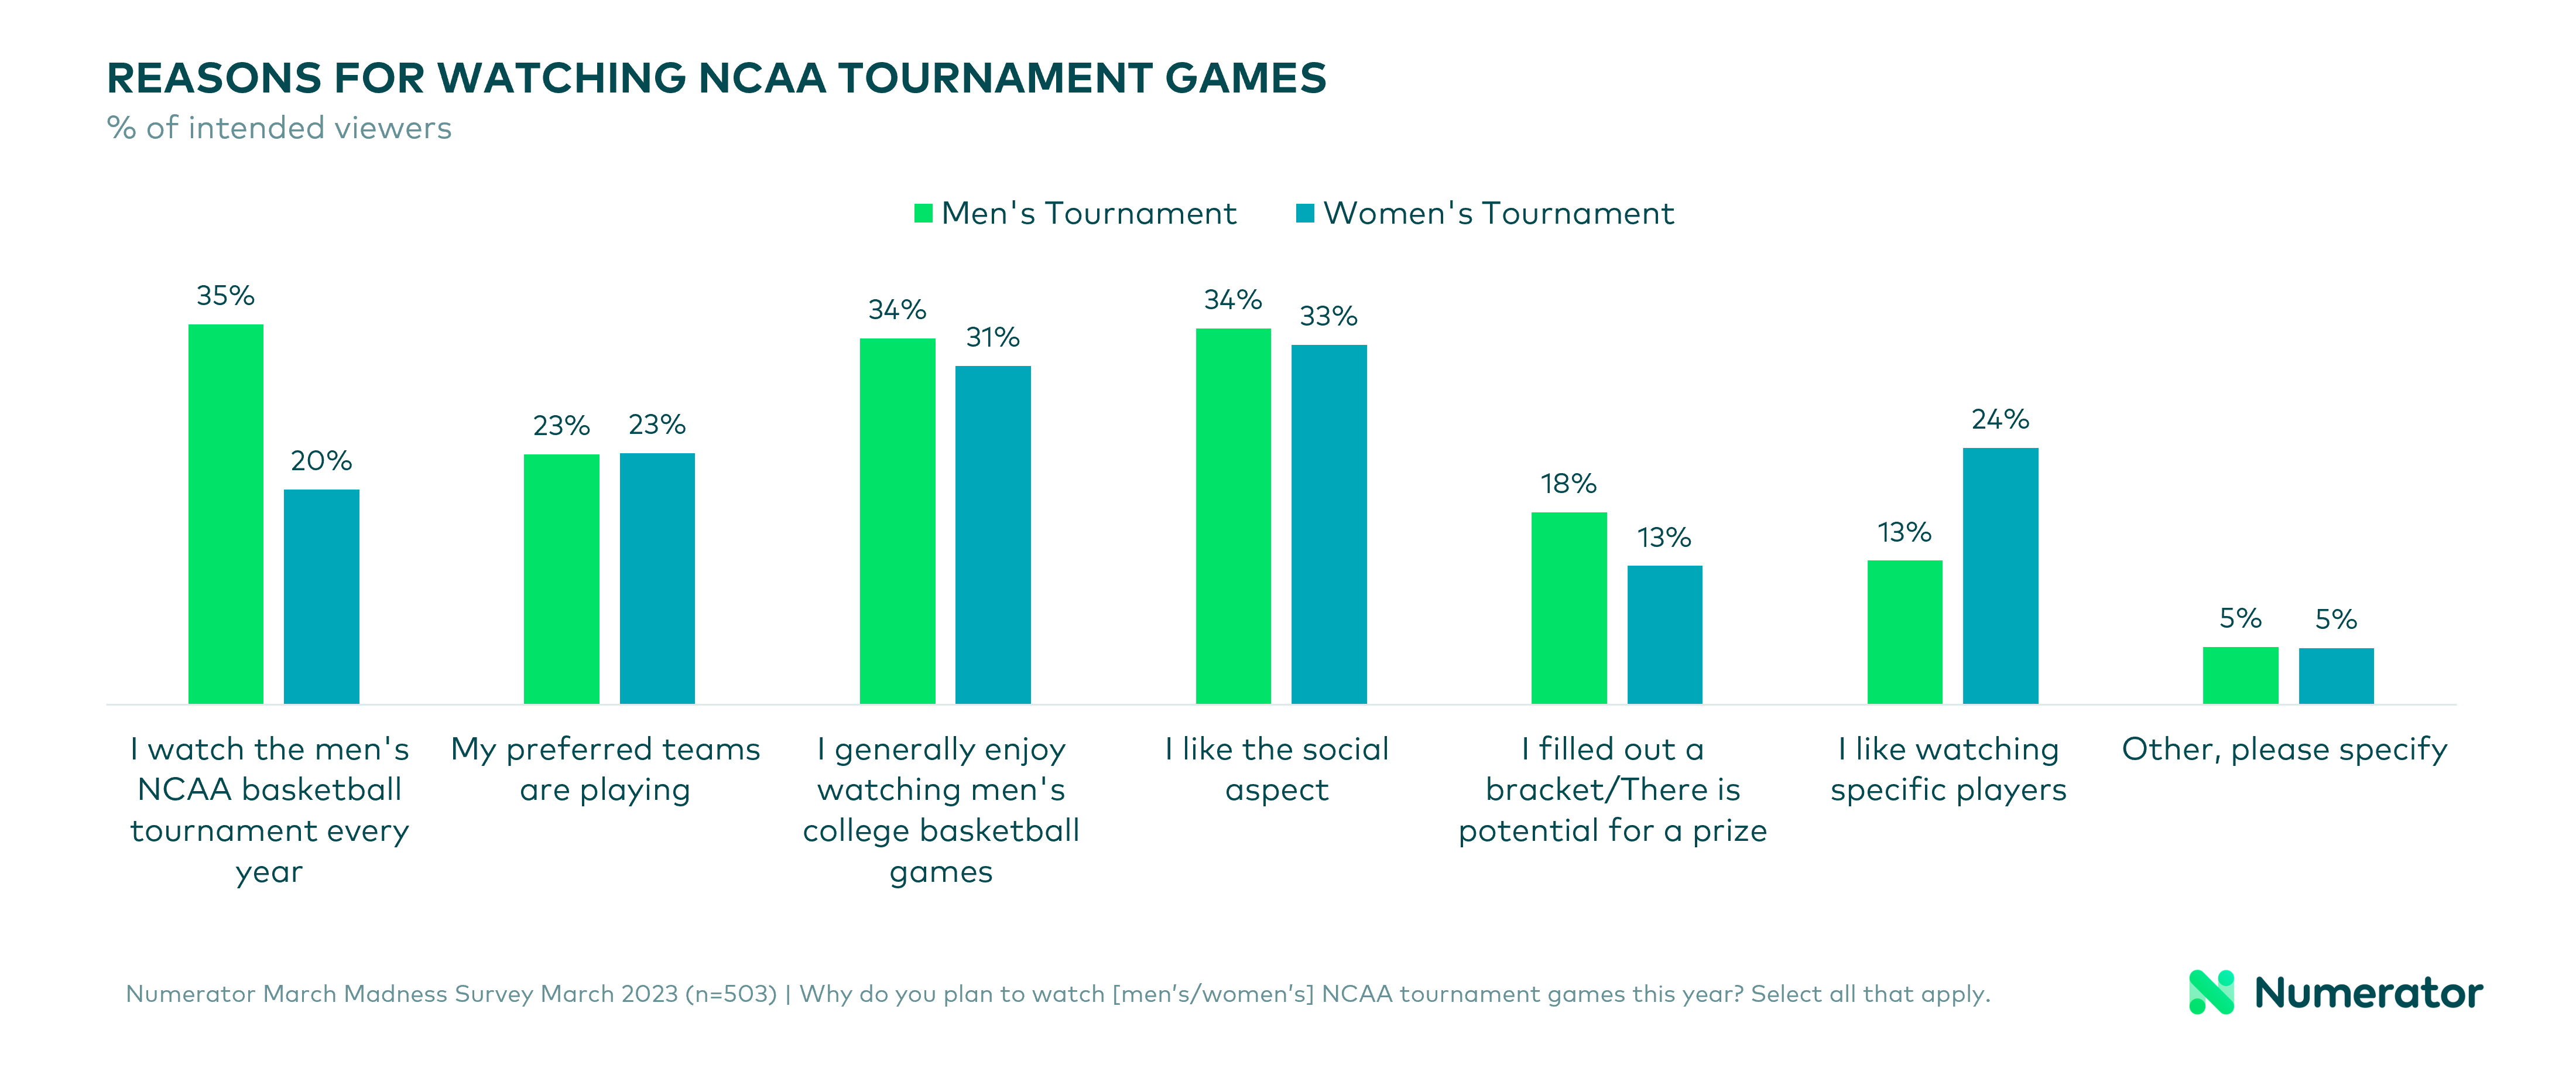 Reasons for watching NCAA tournament games